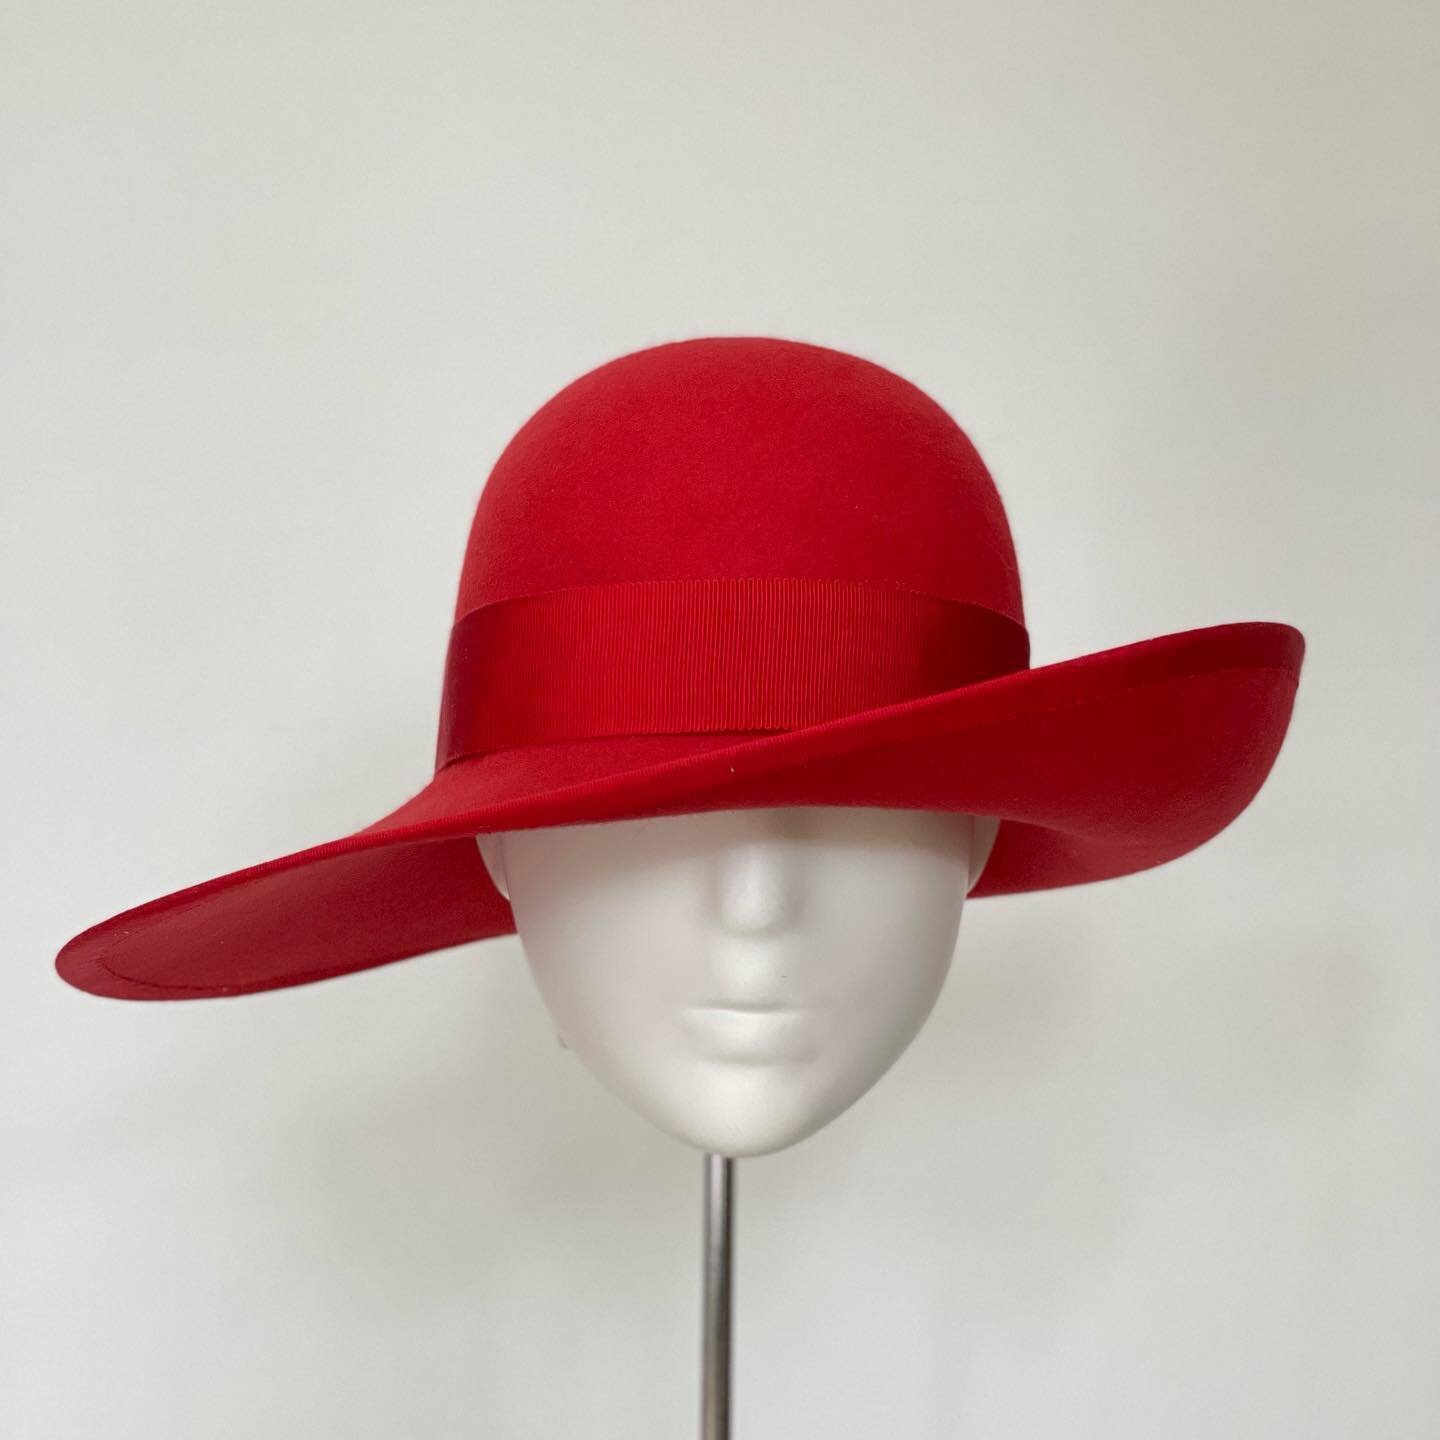 SIDE HUSTLE in RED
She is up for sale in my &lsquo;Studio Clearance Sale&rsquo; .
Worn once by moi.
Sale ends on 7th May&hellip; because after that I&rsquo;m back on the road with caravan in tow&hellip;. looking for more inspiration.
Thanks to @shazz